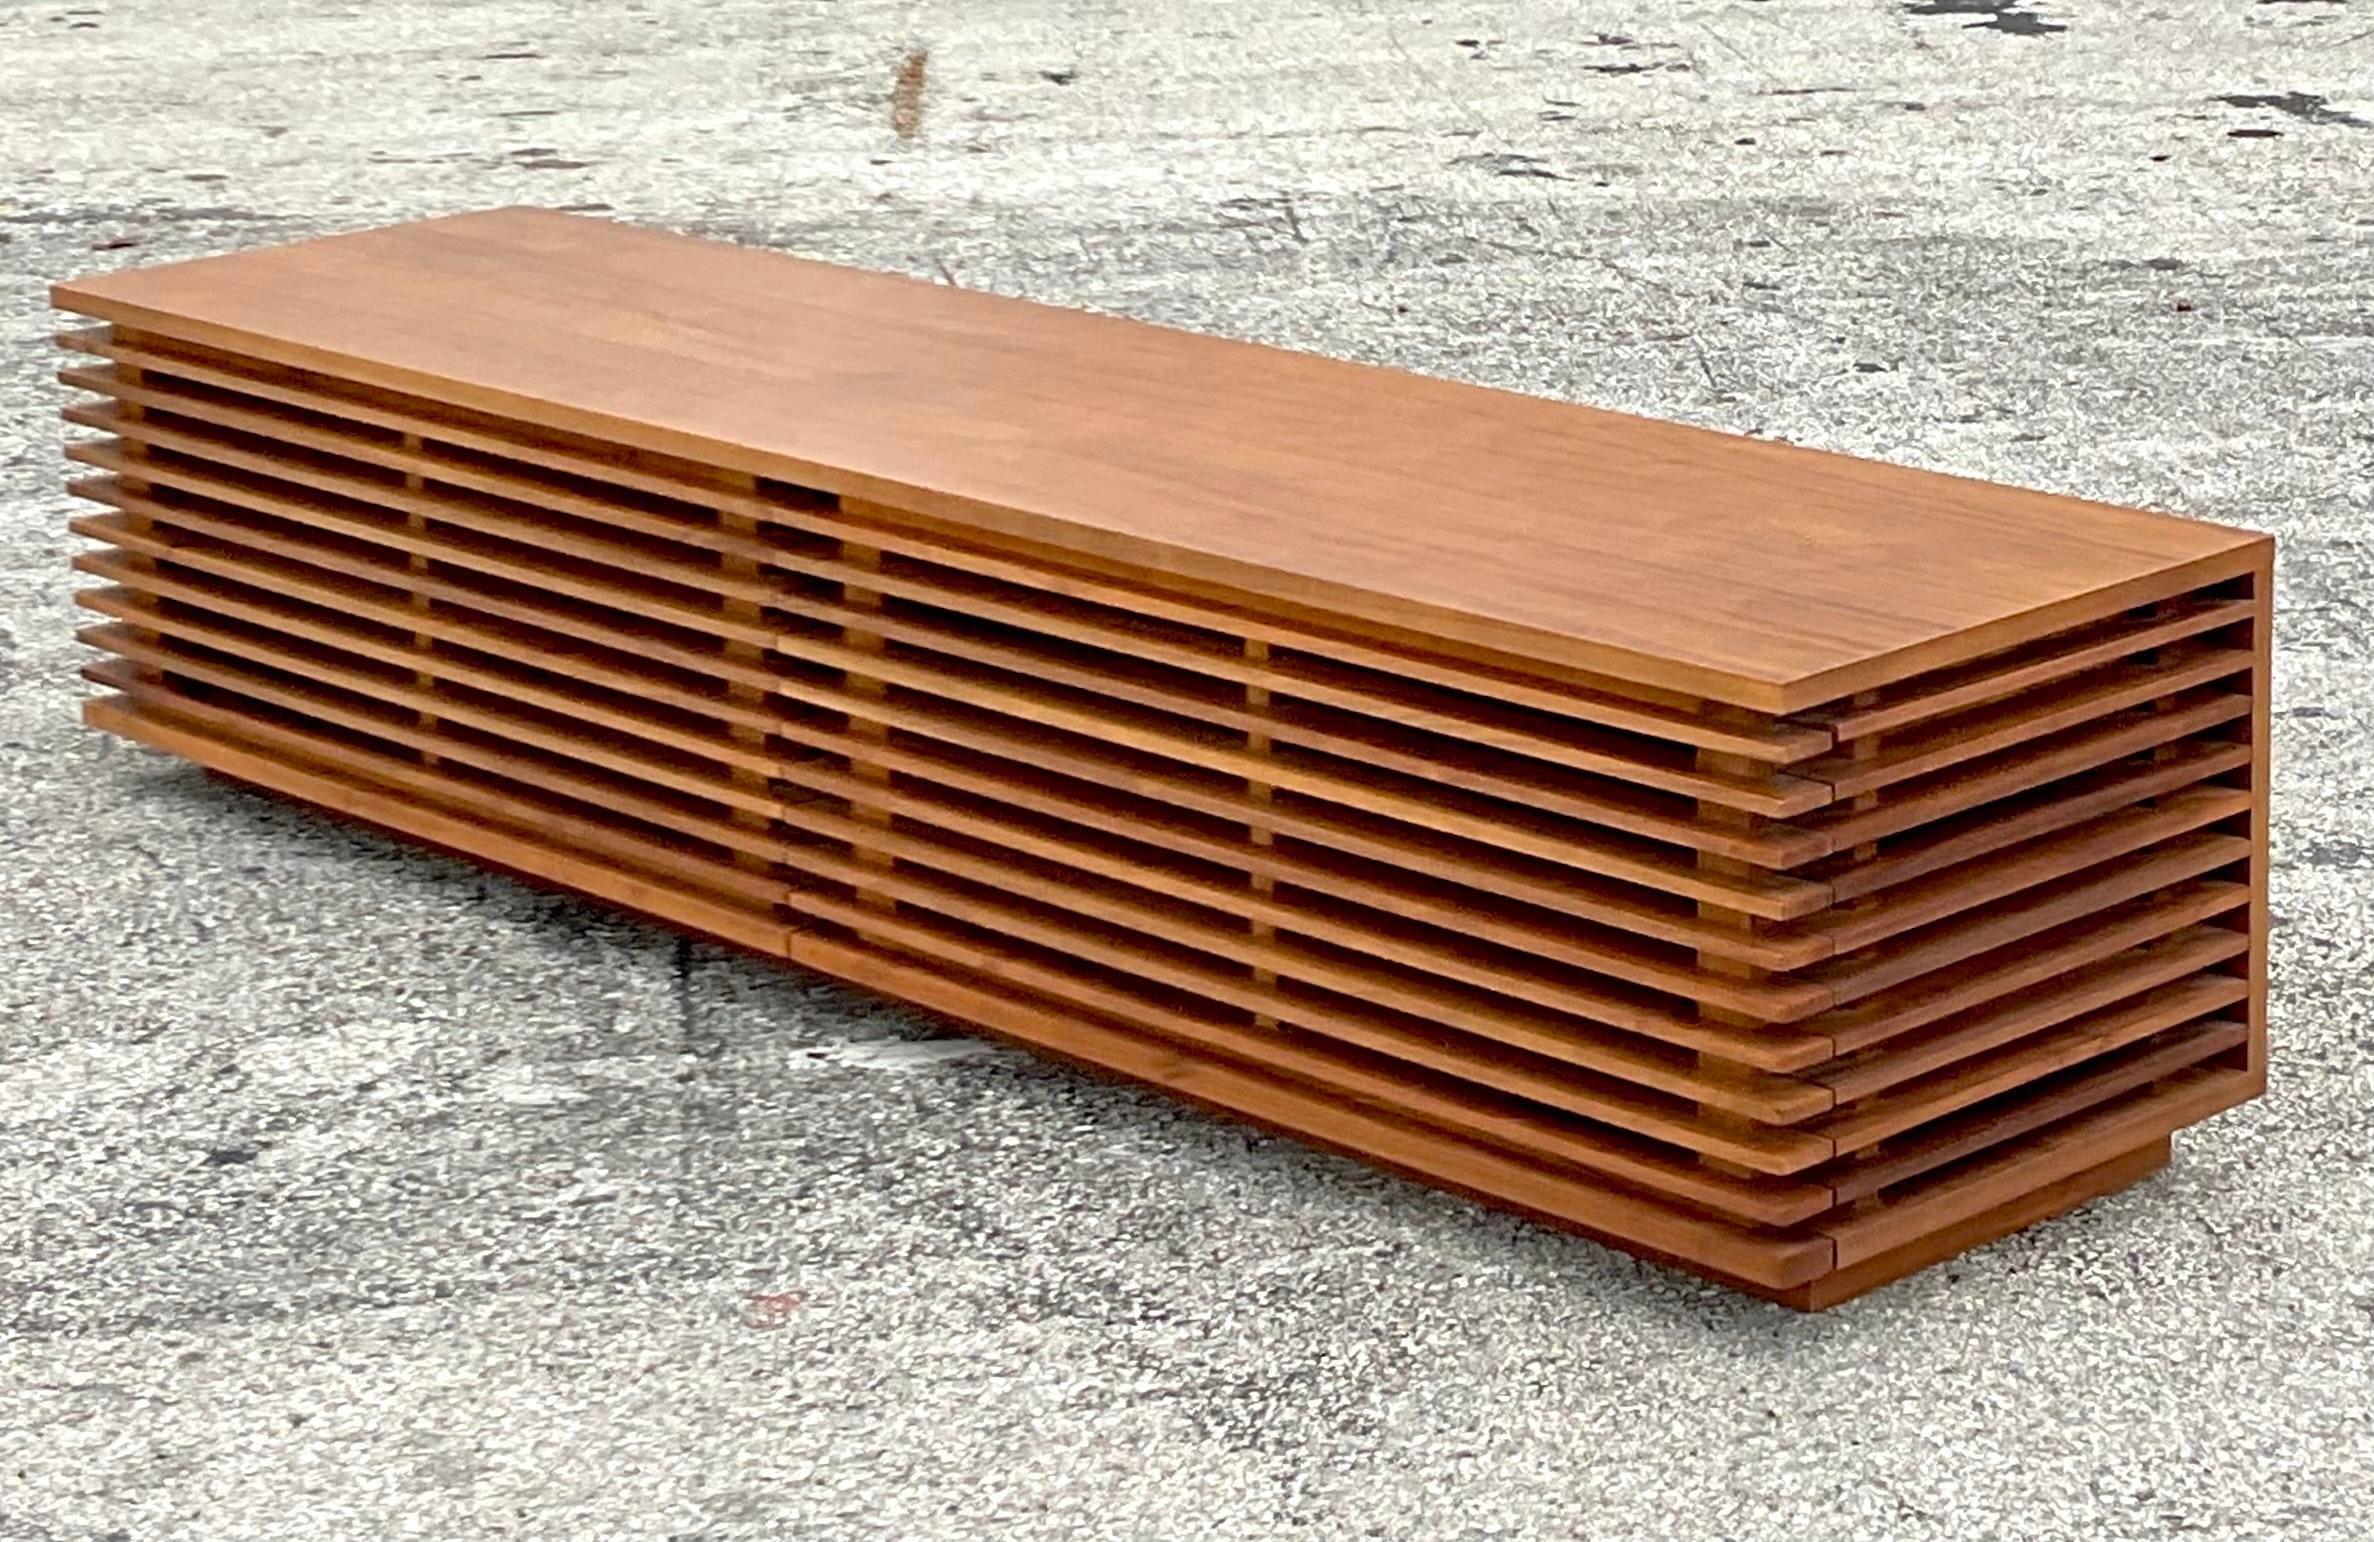 A fantastic vintage Contemporary low credenza. Made by the Folks Furniture group and tagged inside the drawer. A chic slatted design with a low profile that is perfect for your gigantic flat screen TV! Acquired from a Palm Beach estate.